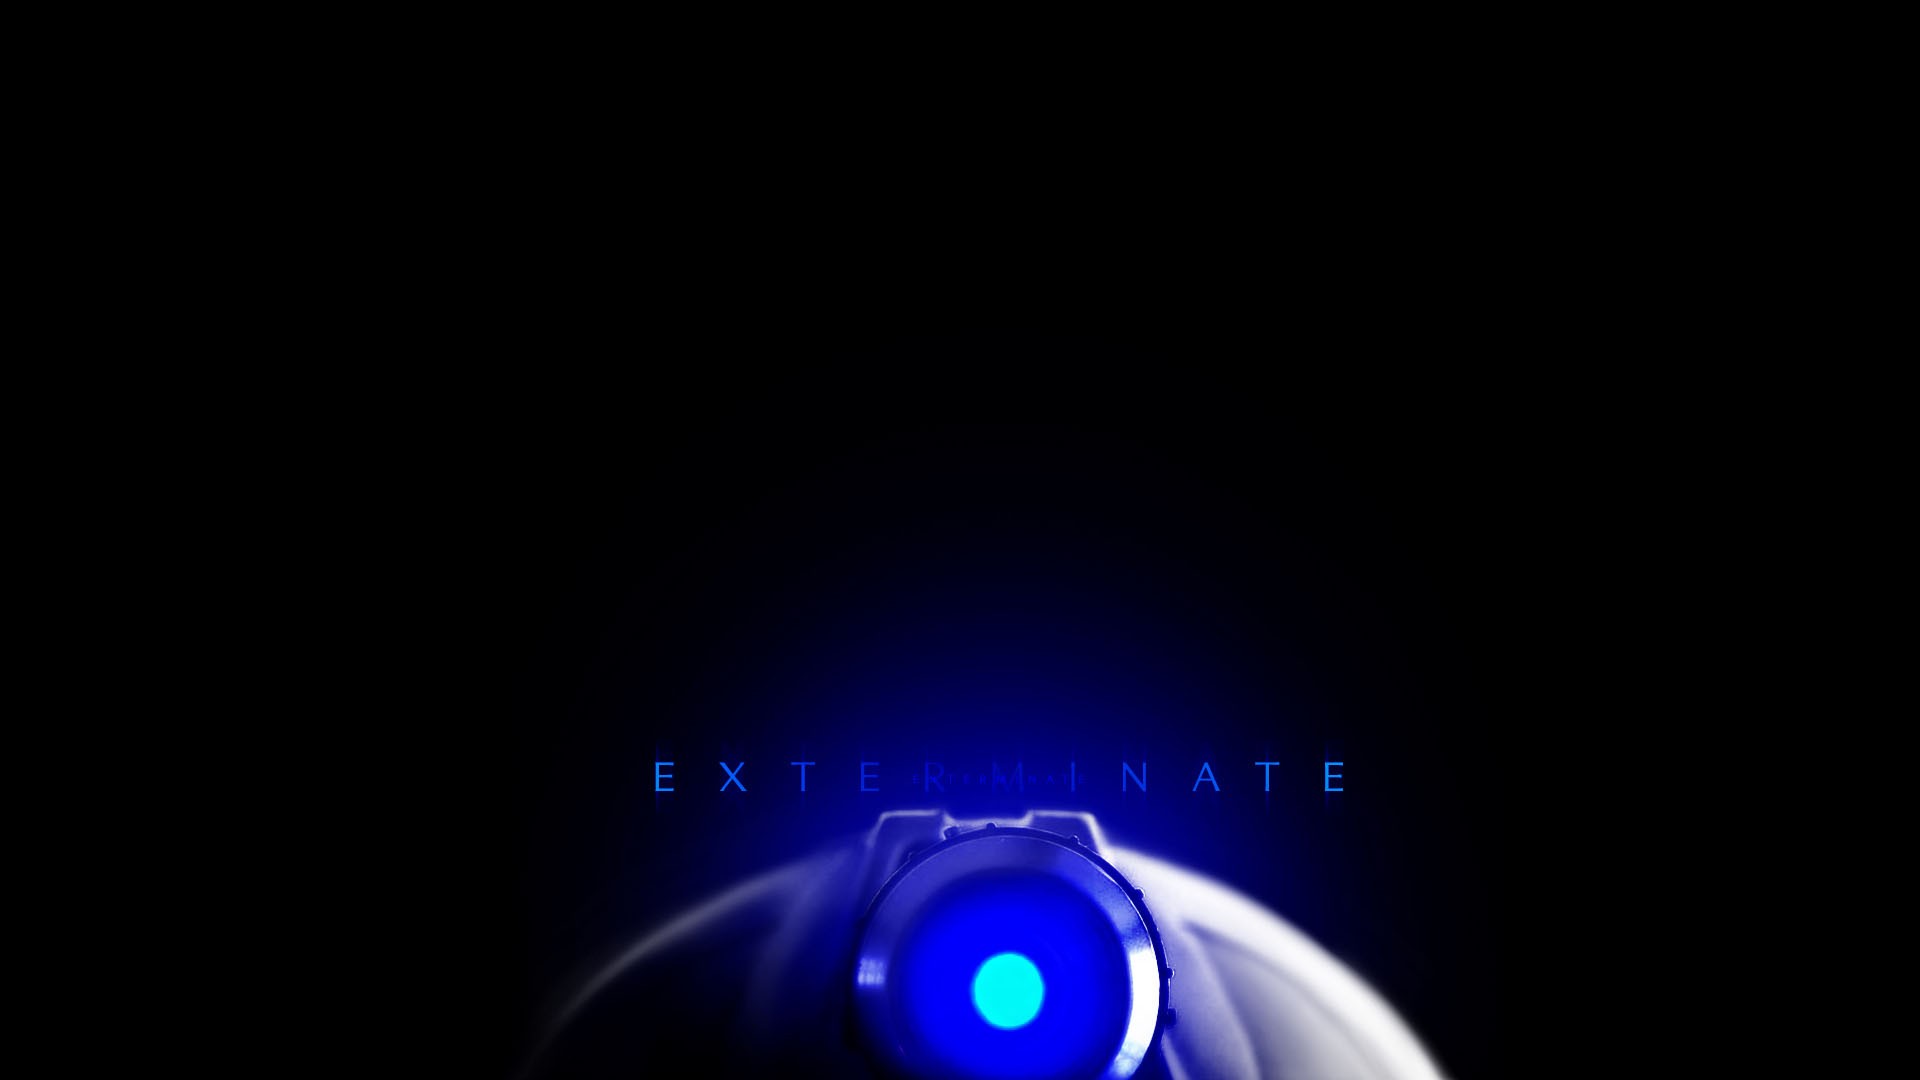 Doctor Who, Daleks, The Doctor, Simple Background Wallpaper